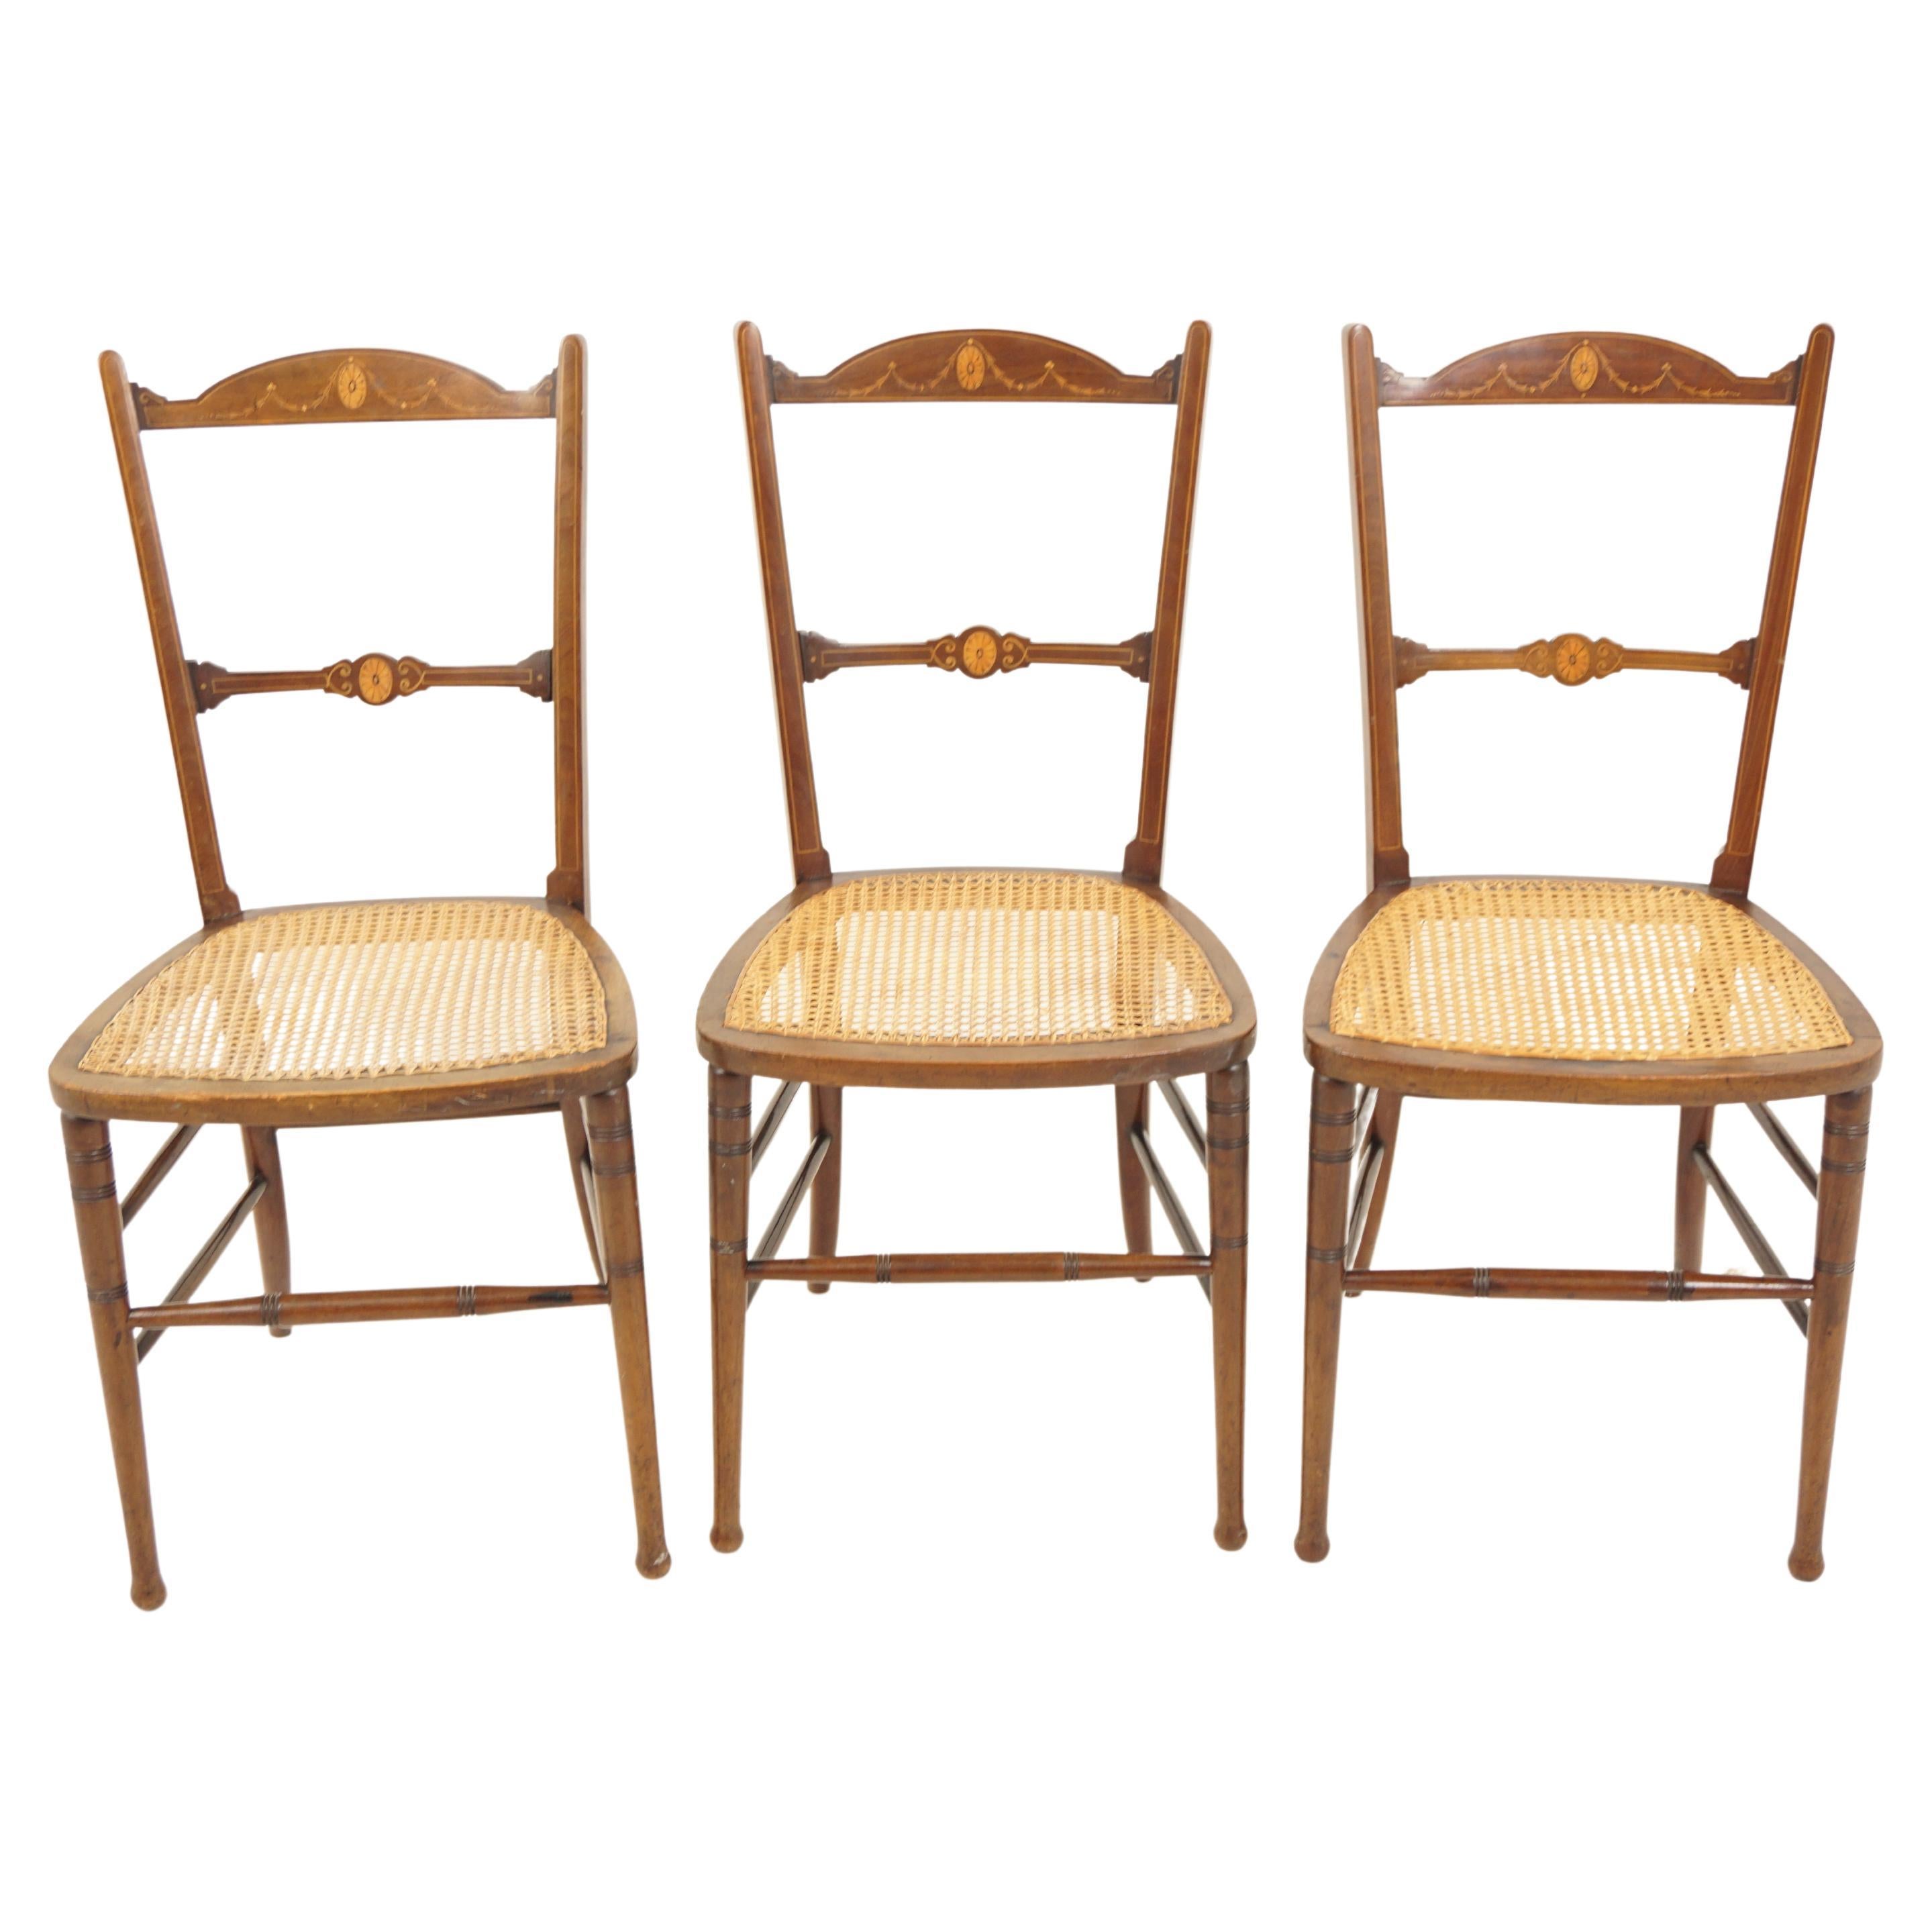 3 Ant. Victorian Walnut Inlaid Bedroom Chairs Wicker Seats, Scotland 1895 For Sale